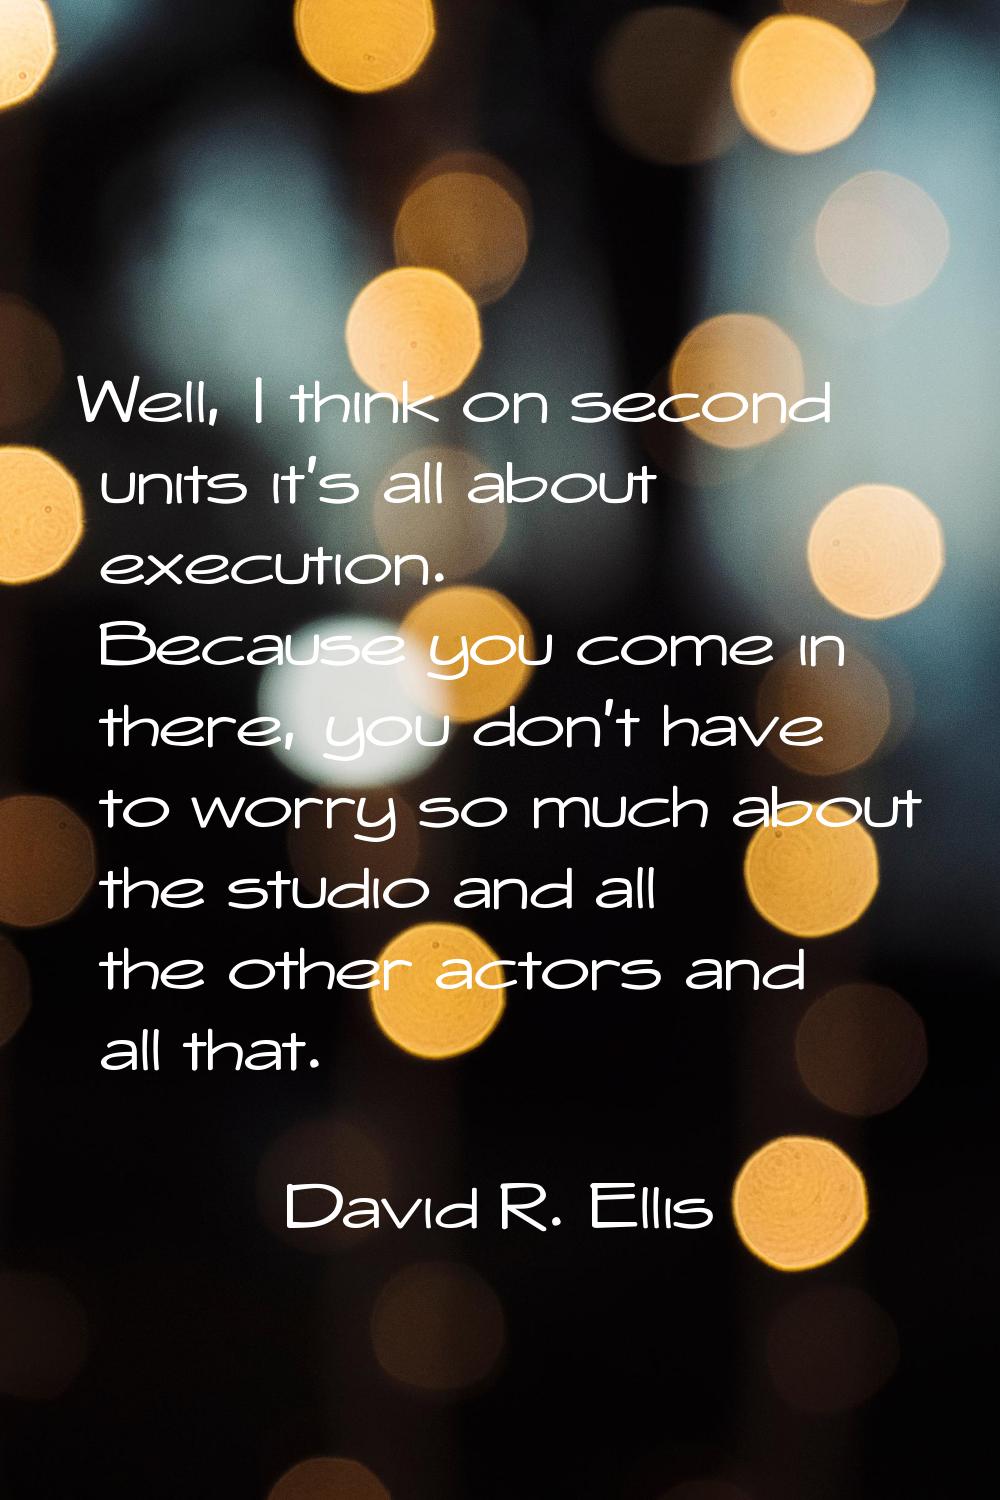 Well, I think on second units it's all about execution. Because you come in there, you don't have t